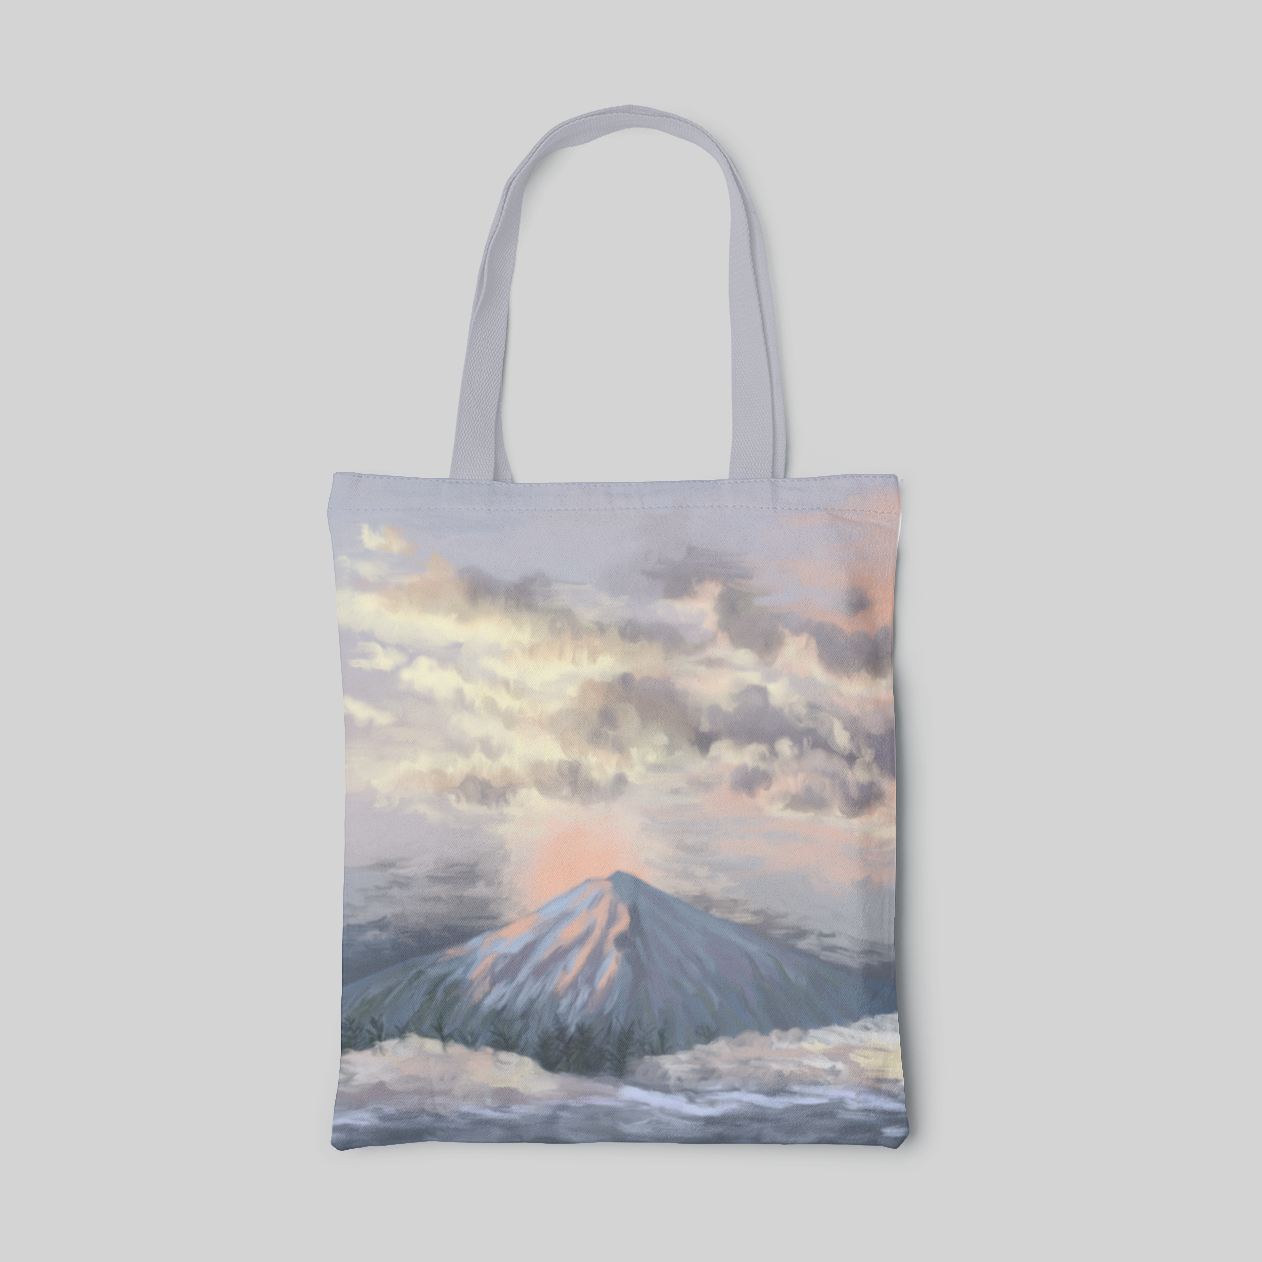 nature designed tote bag with pastel themed fuji mountain landscape and clouds, and a coral sun rising up behind the mount fuji, front side